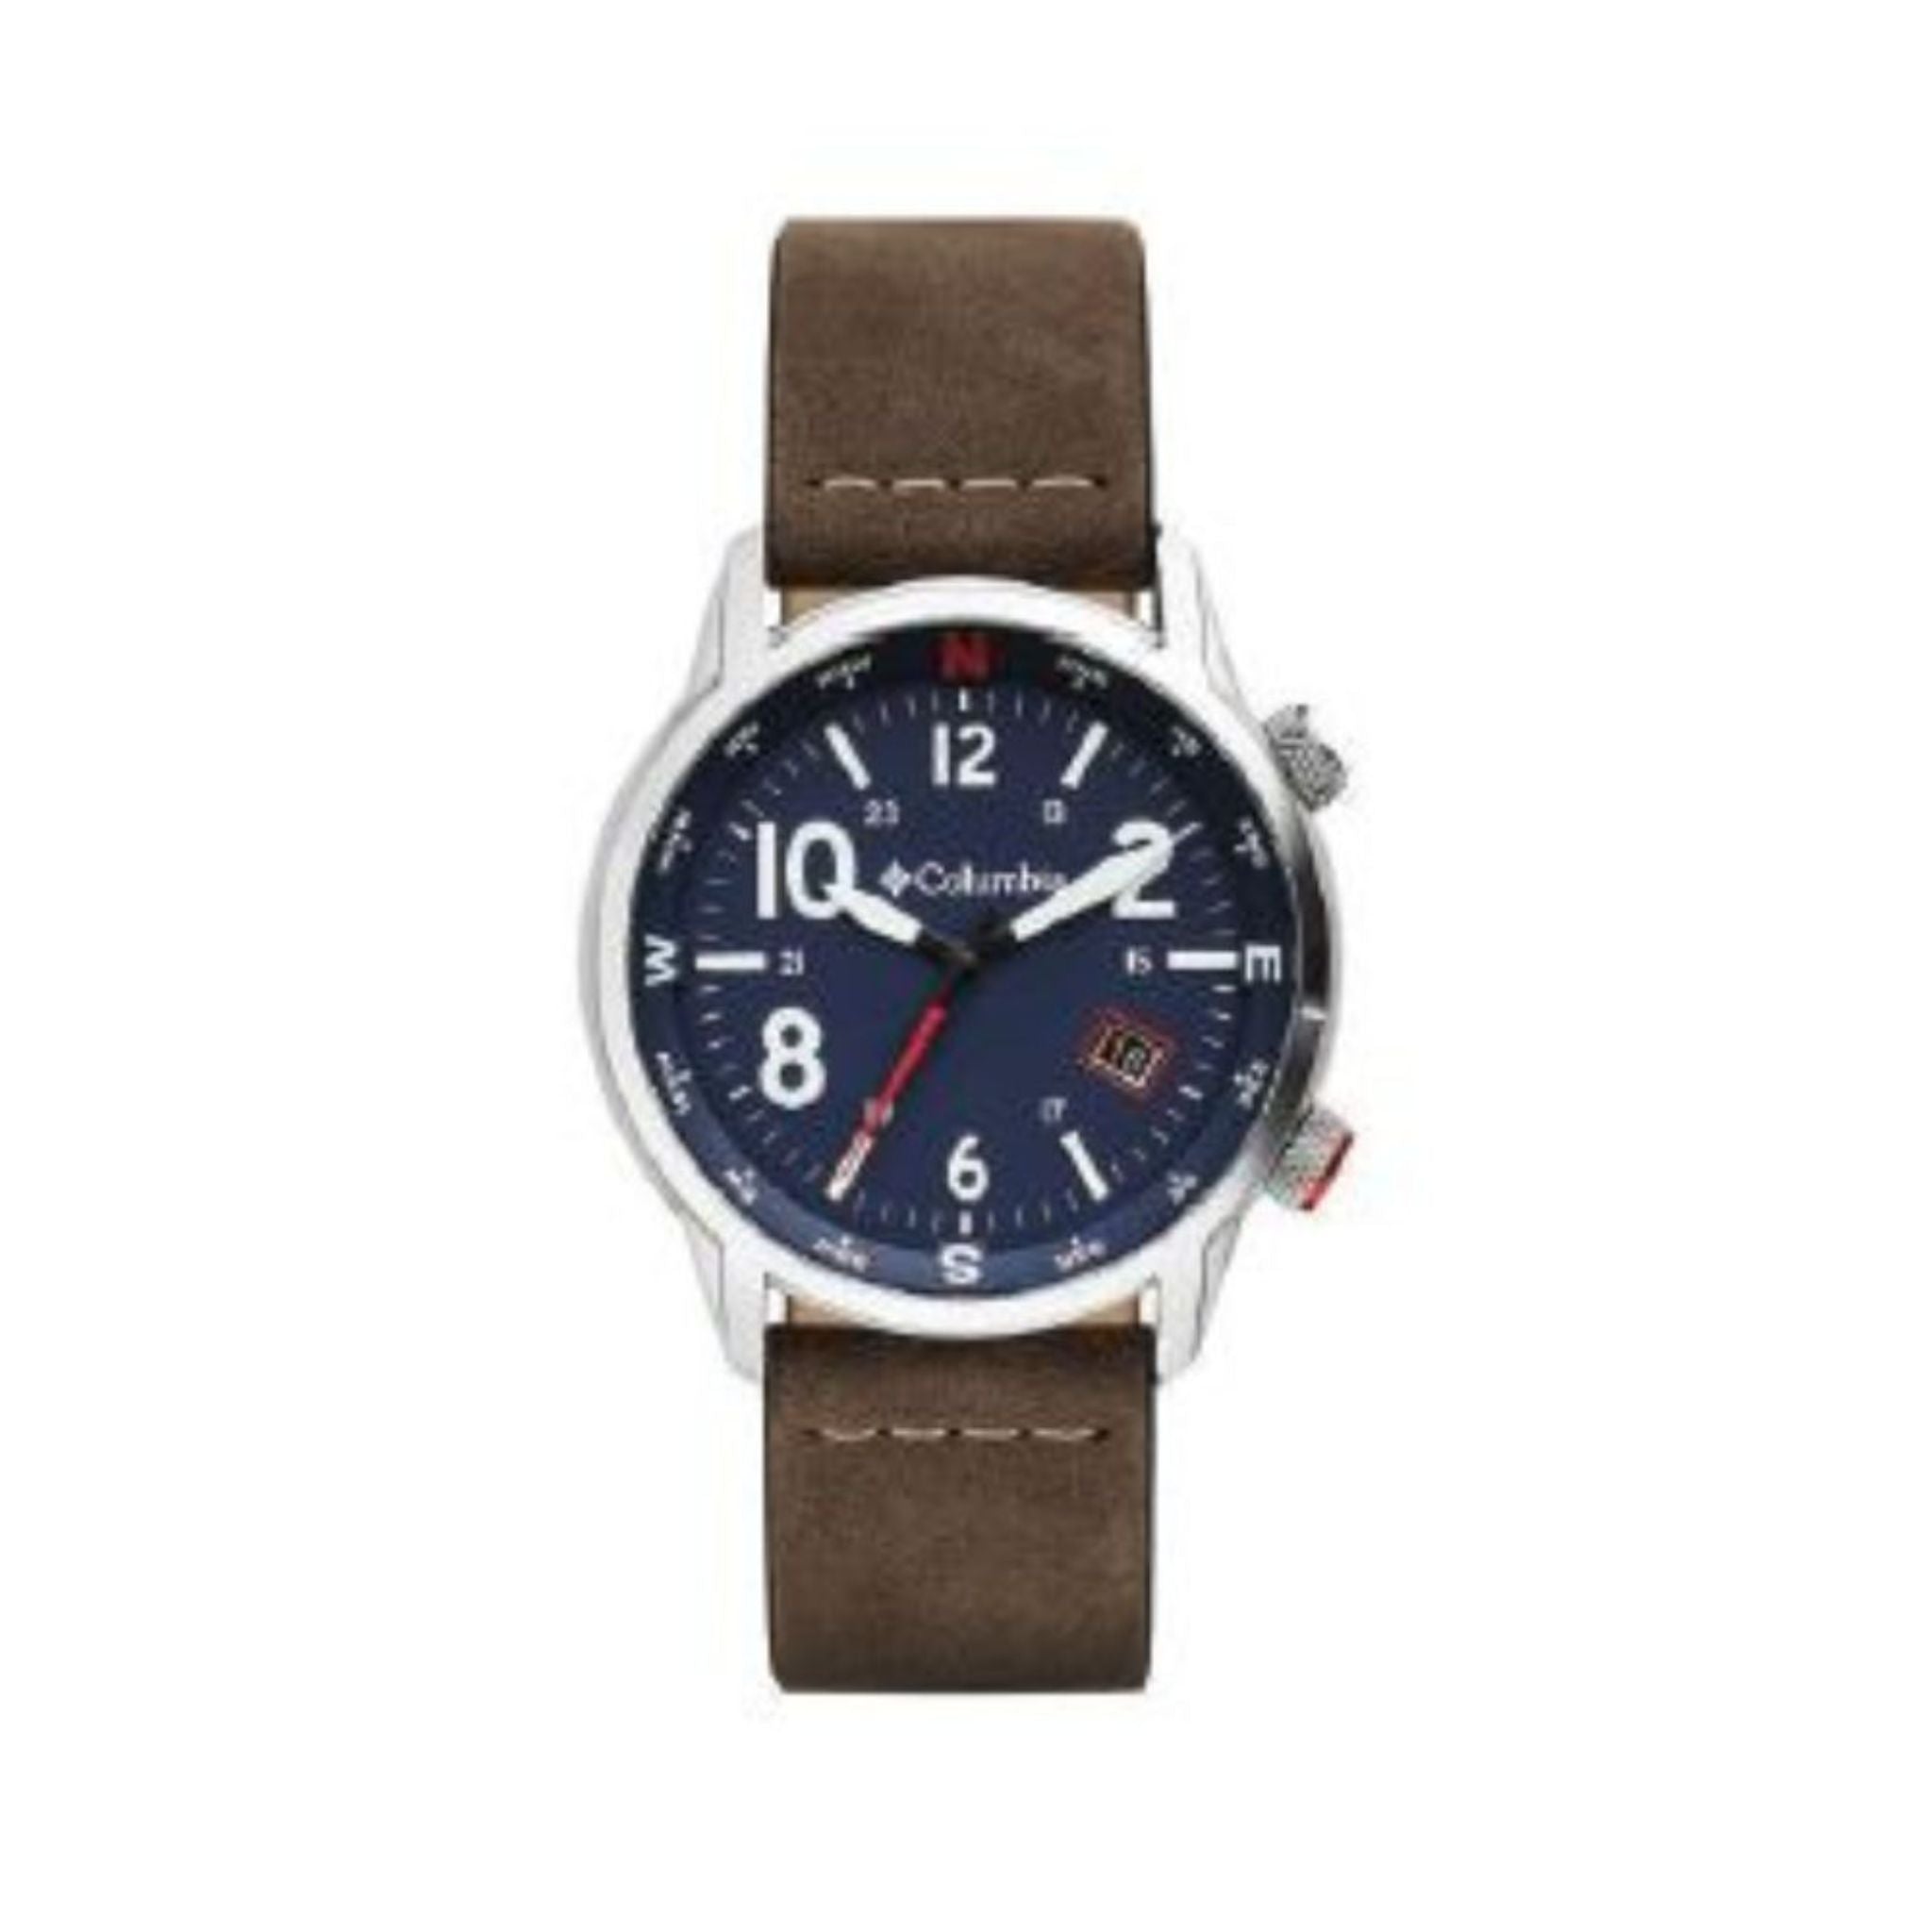 Columbia Watch Outbacker COCS01-001 - Brown